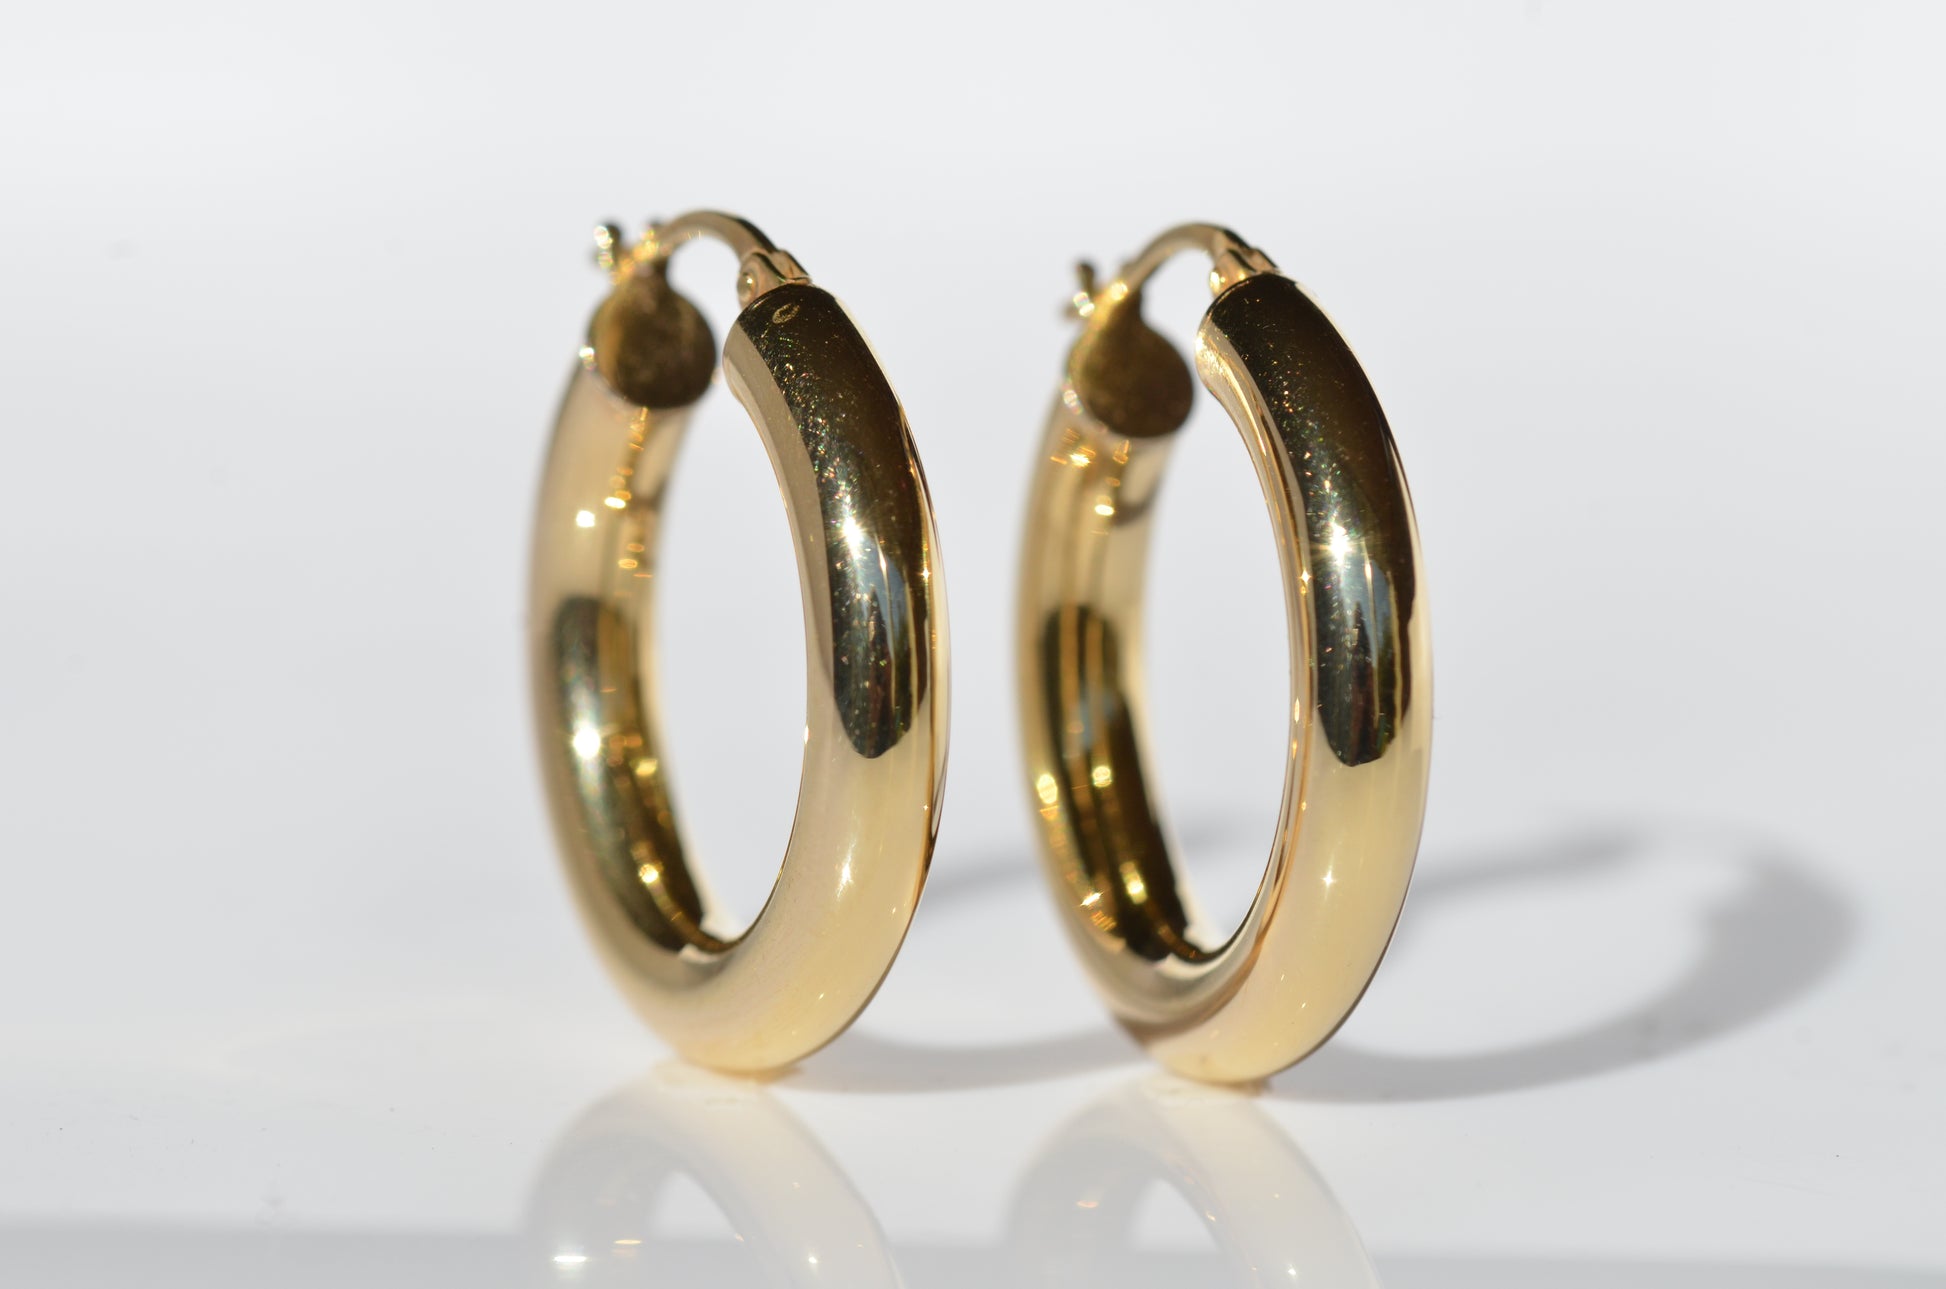 on a stark white background, the hoop earrings are stood upright and turned slightly to the right to provide a full view.